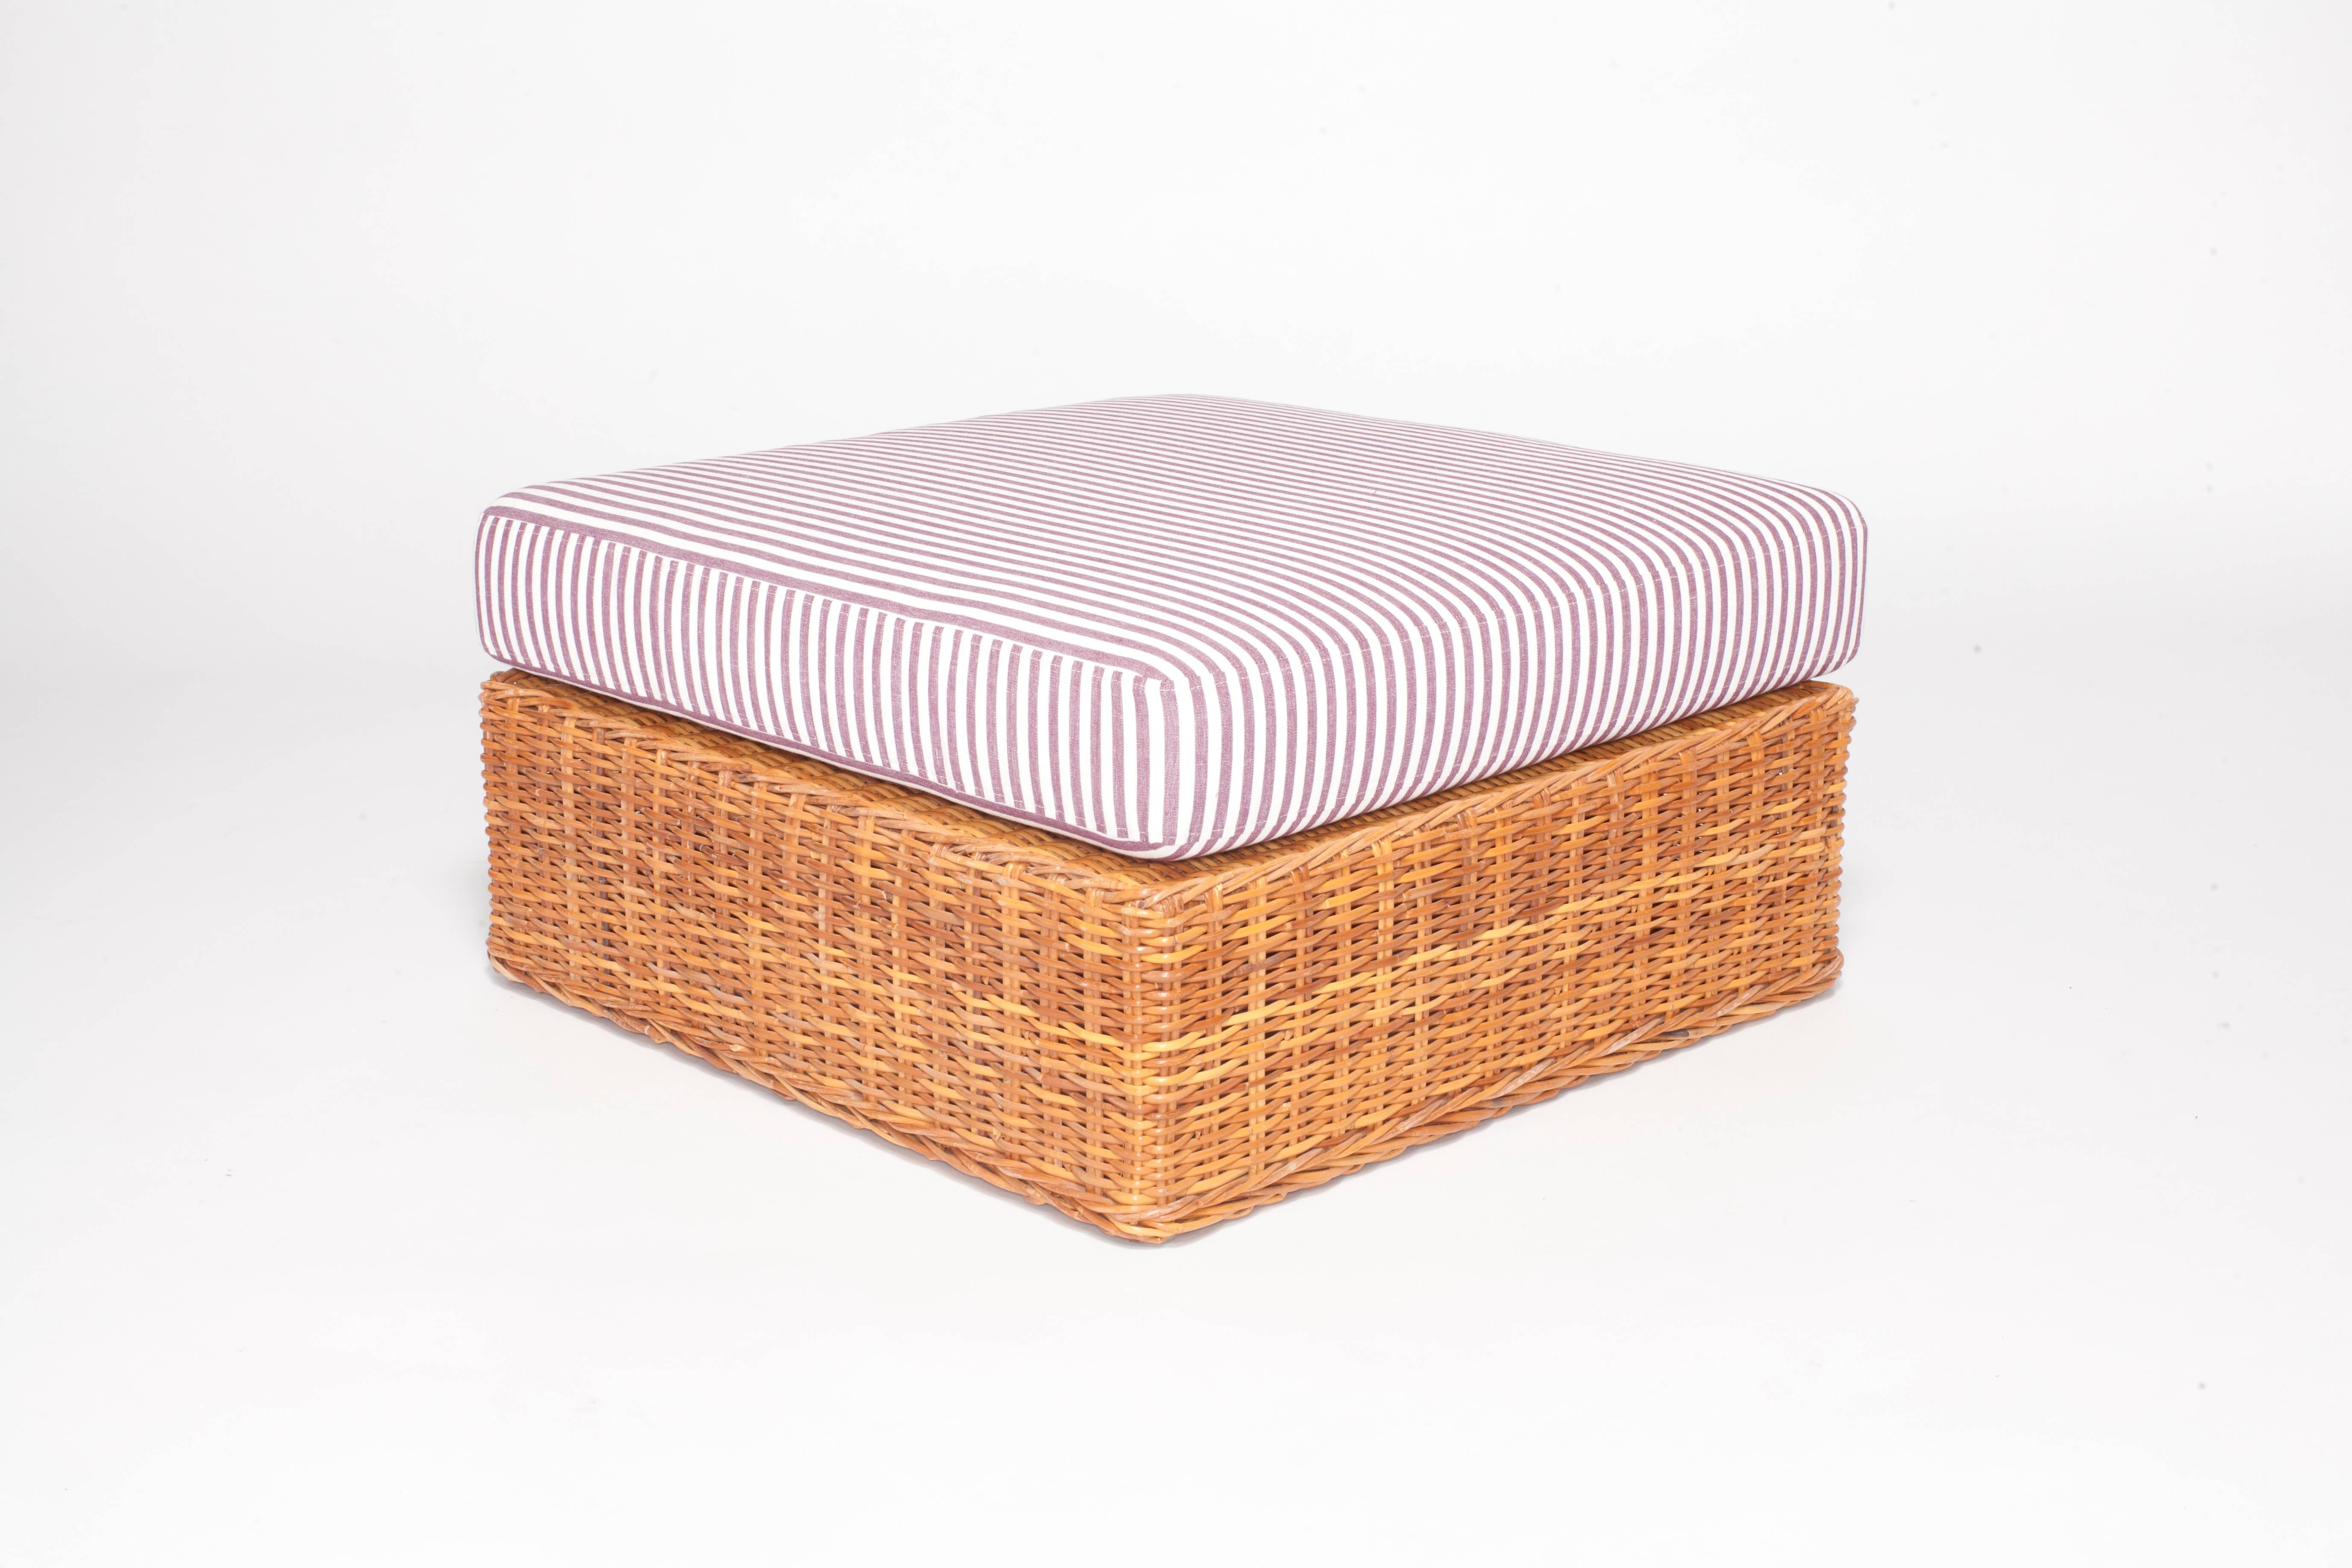 Wicker ottoman newly upholstered in purple striped fabric.